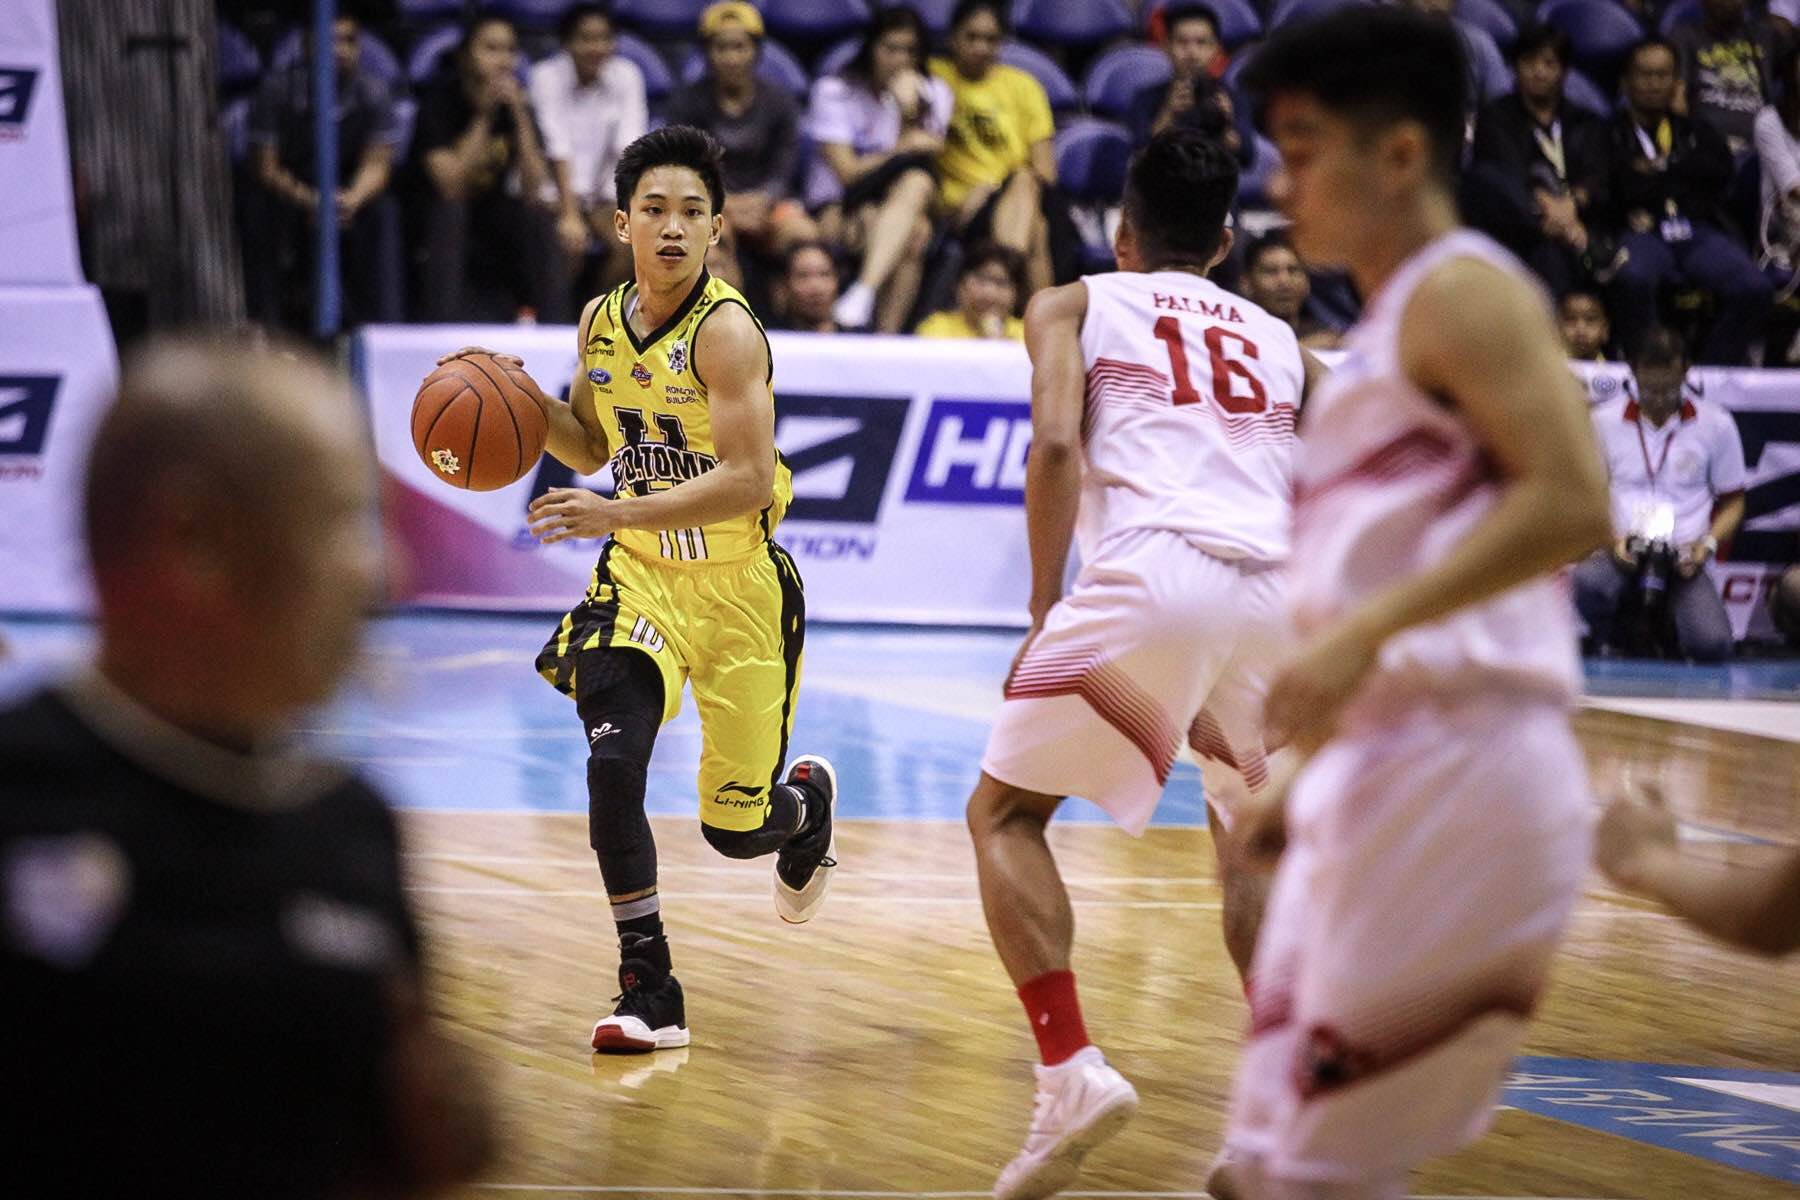 Subido fires 30 as UST bows out with a win